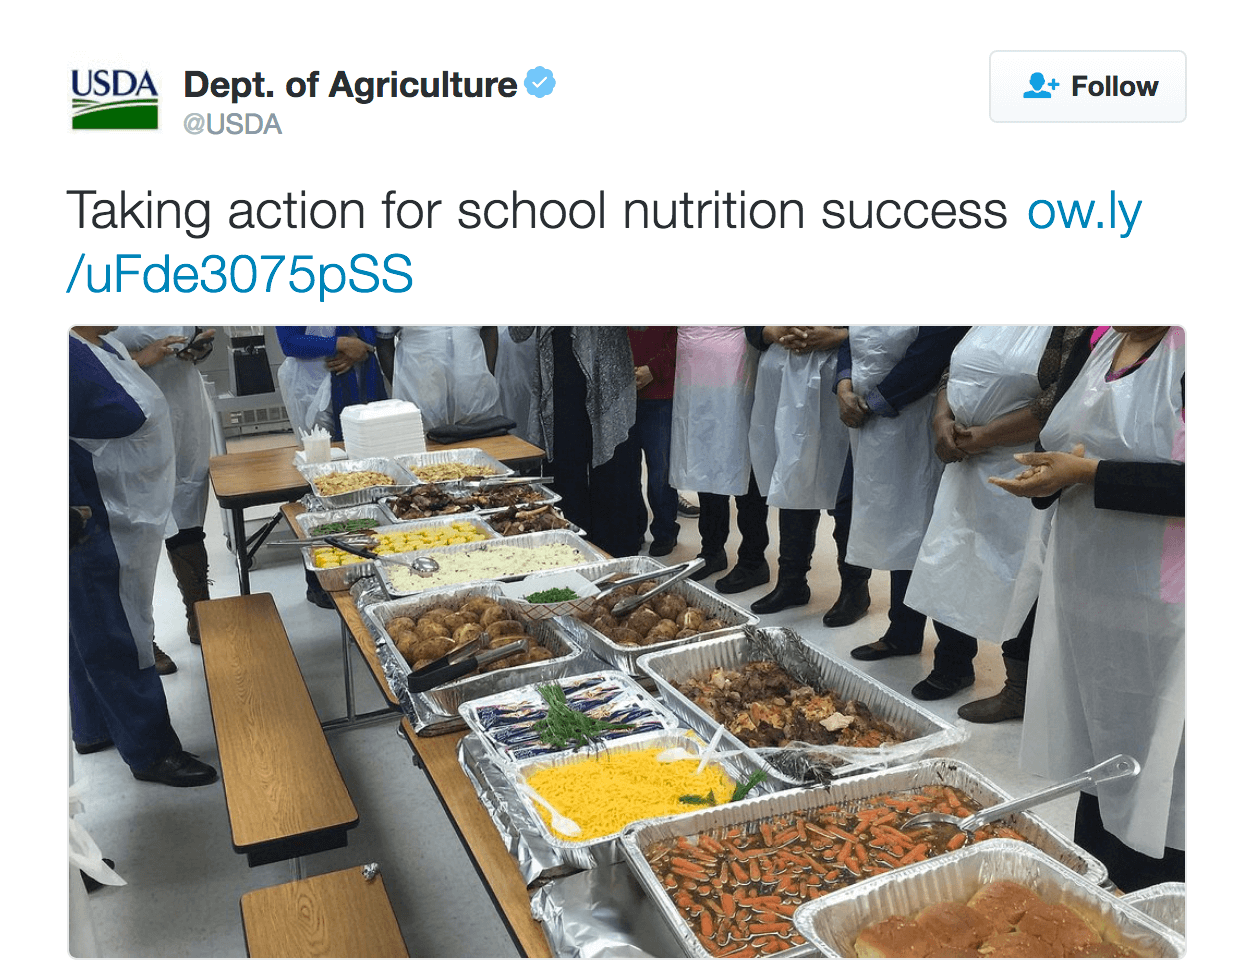 Taking action for school nutrition success http://ow.ly/uFde3075pSS